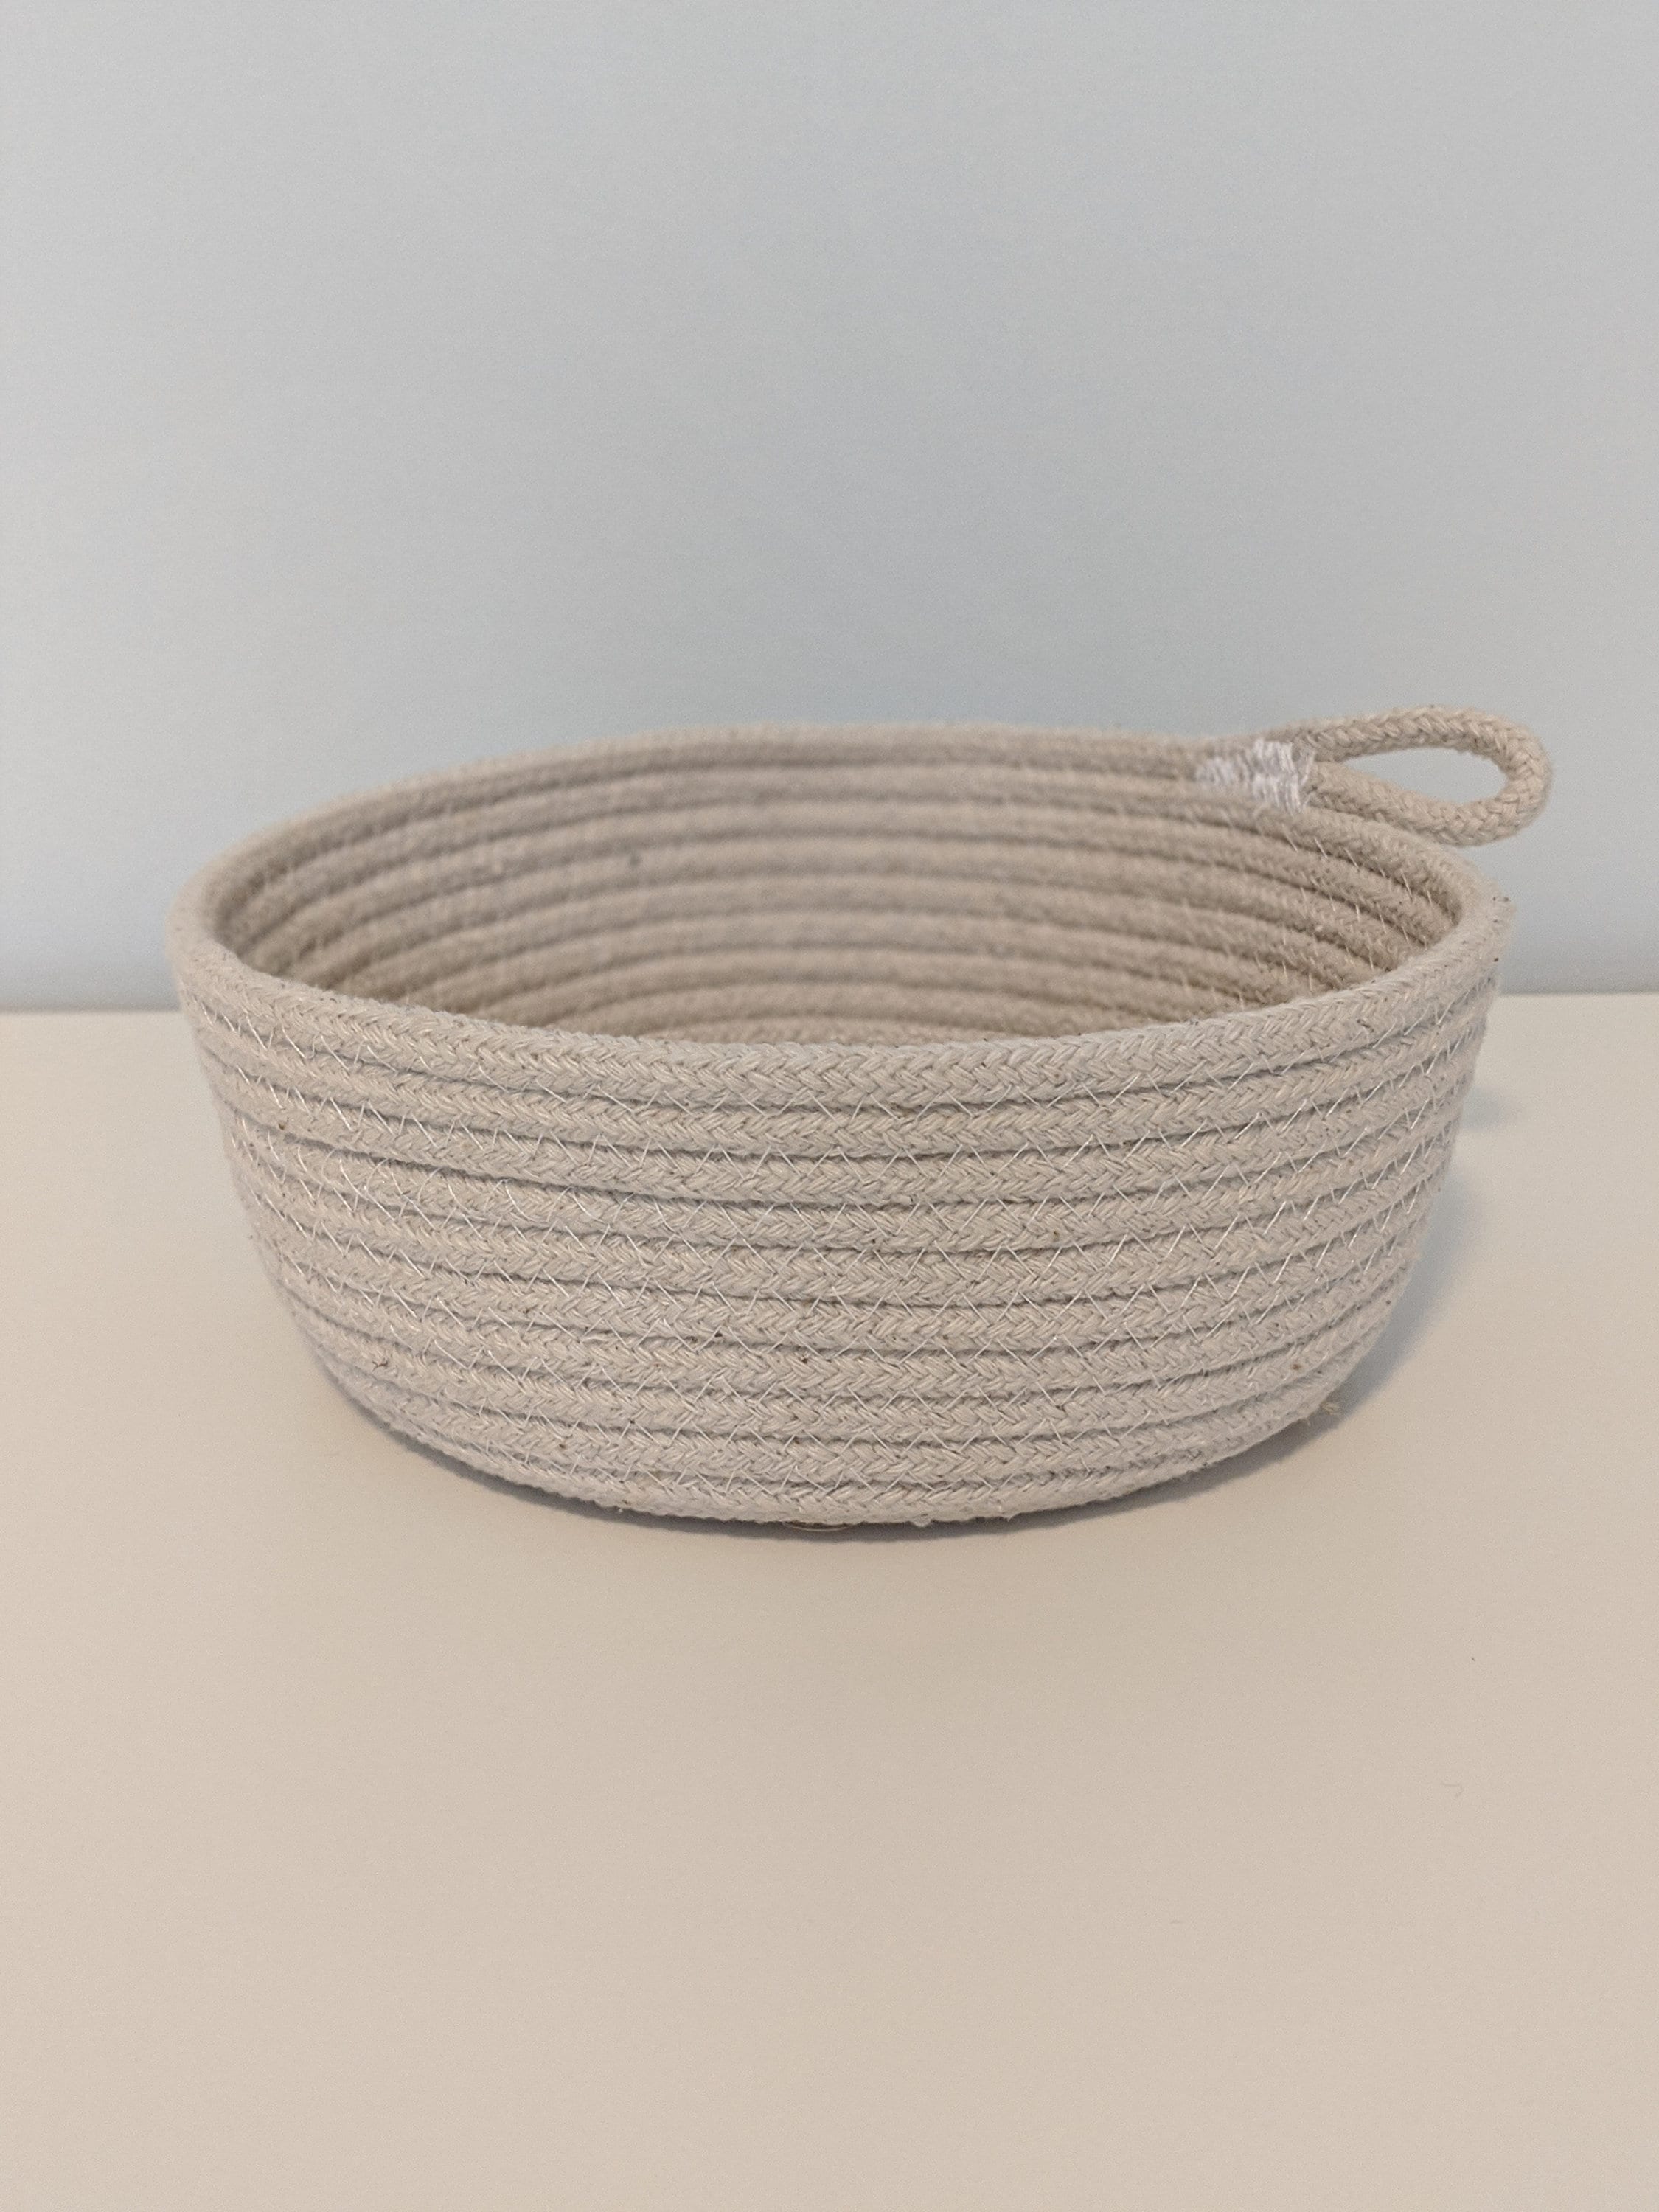 x 14'' H White & Grey Syeeiex Cotton Rope Storage Basket 16'' Laundry Basket with Handles for Living Room Lounge Nursery Room Toy Storage Blanket Baskets Decorative Woven W 